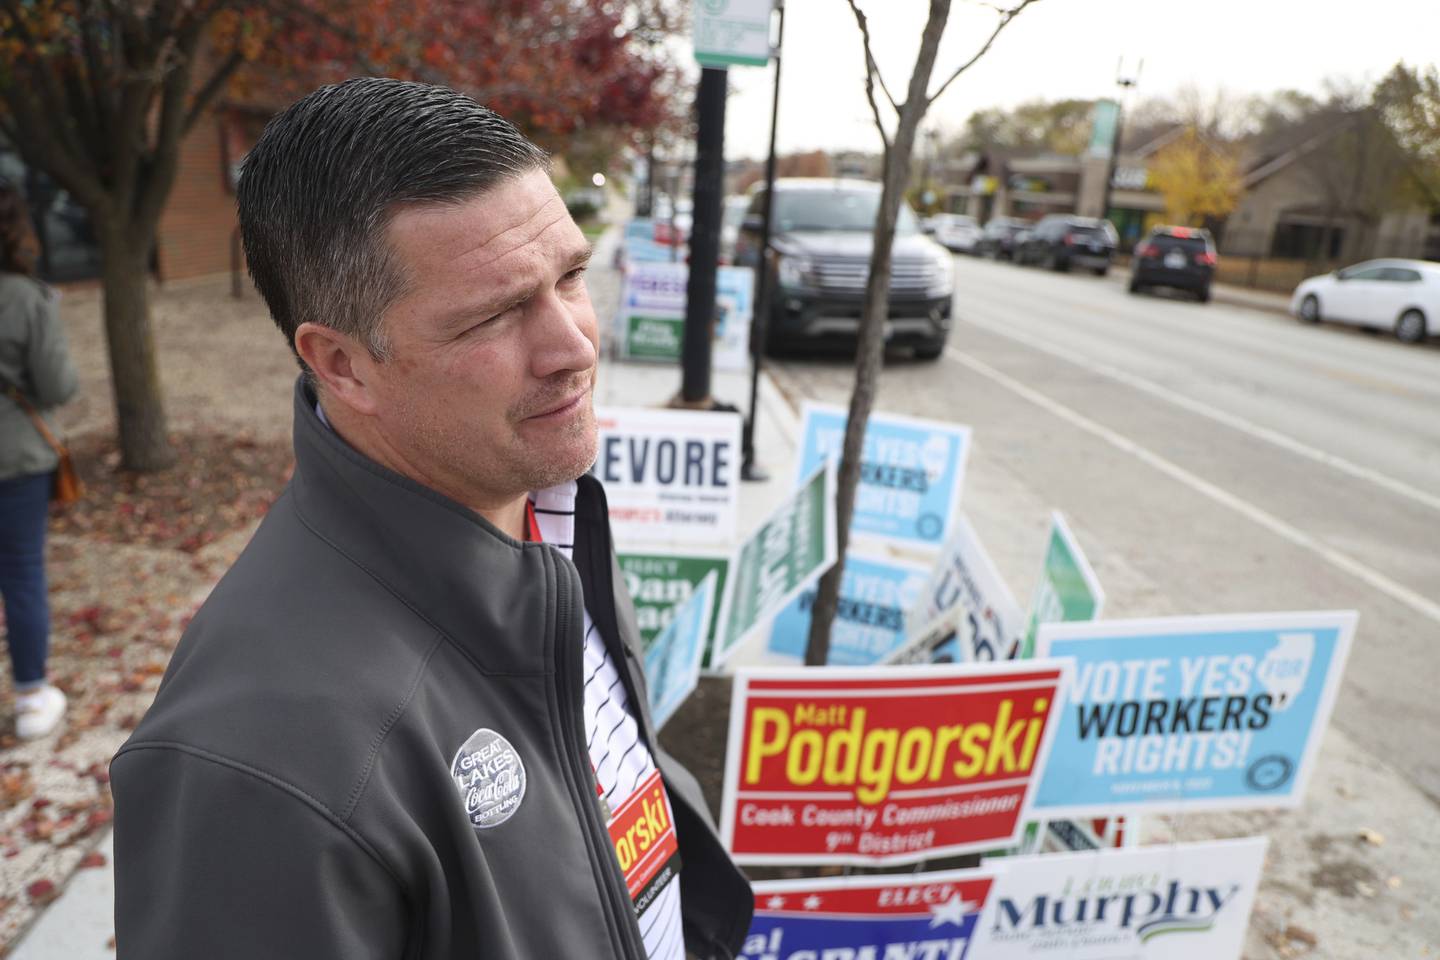 Republican Cook County Board 9th District candidate Mike Podgorski hands out flyers outside of Roden Library on Oct. 30, 2022, in Chicago. 